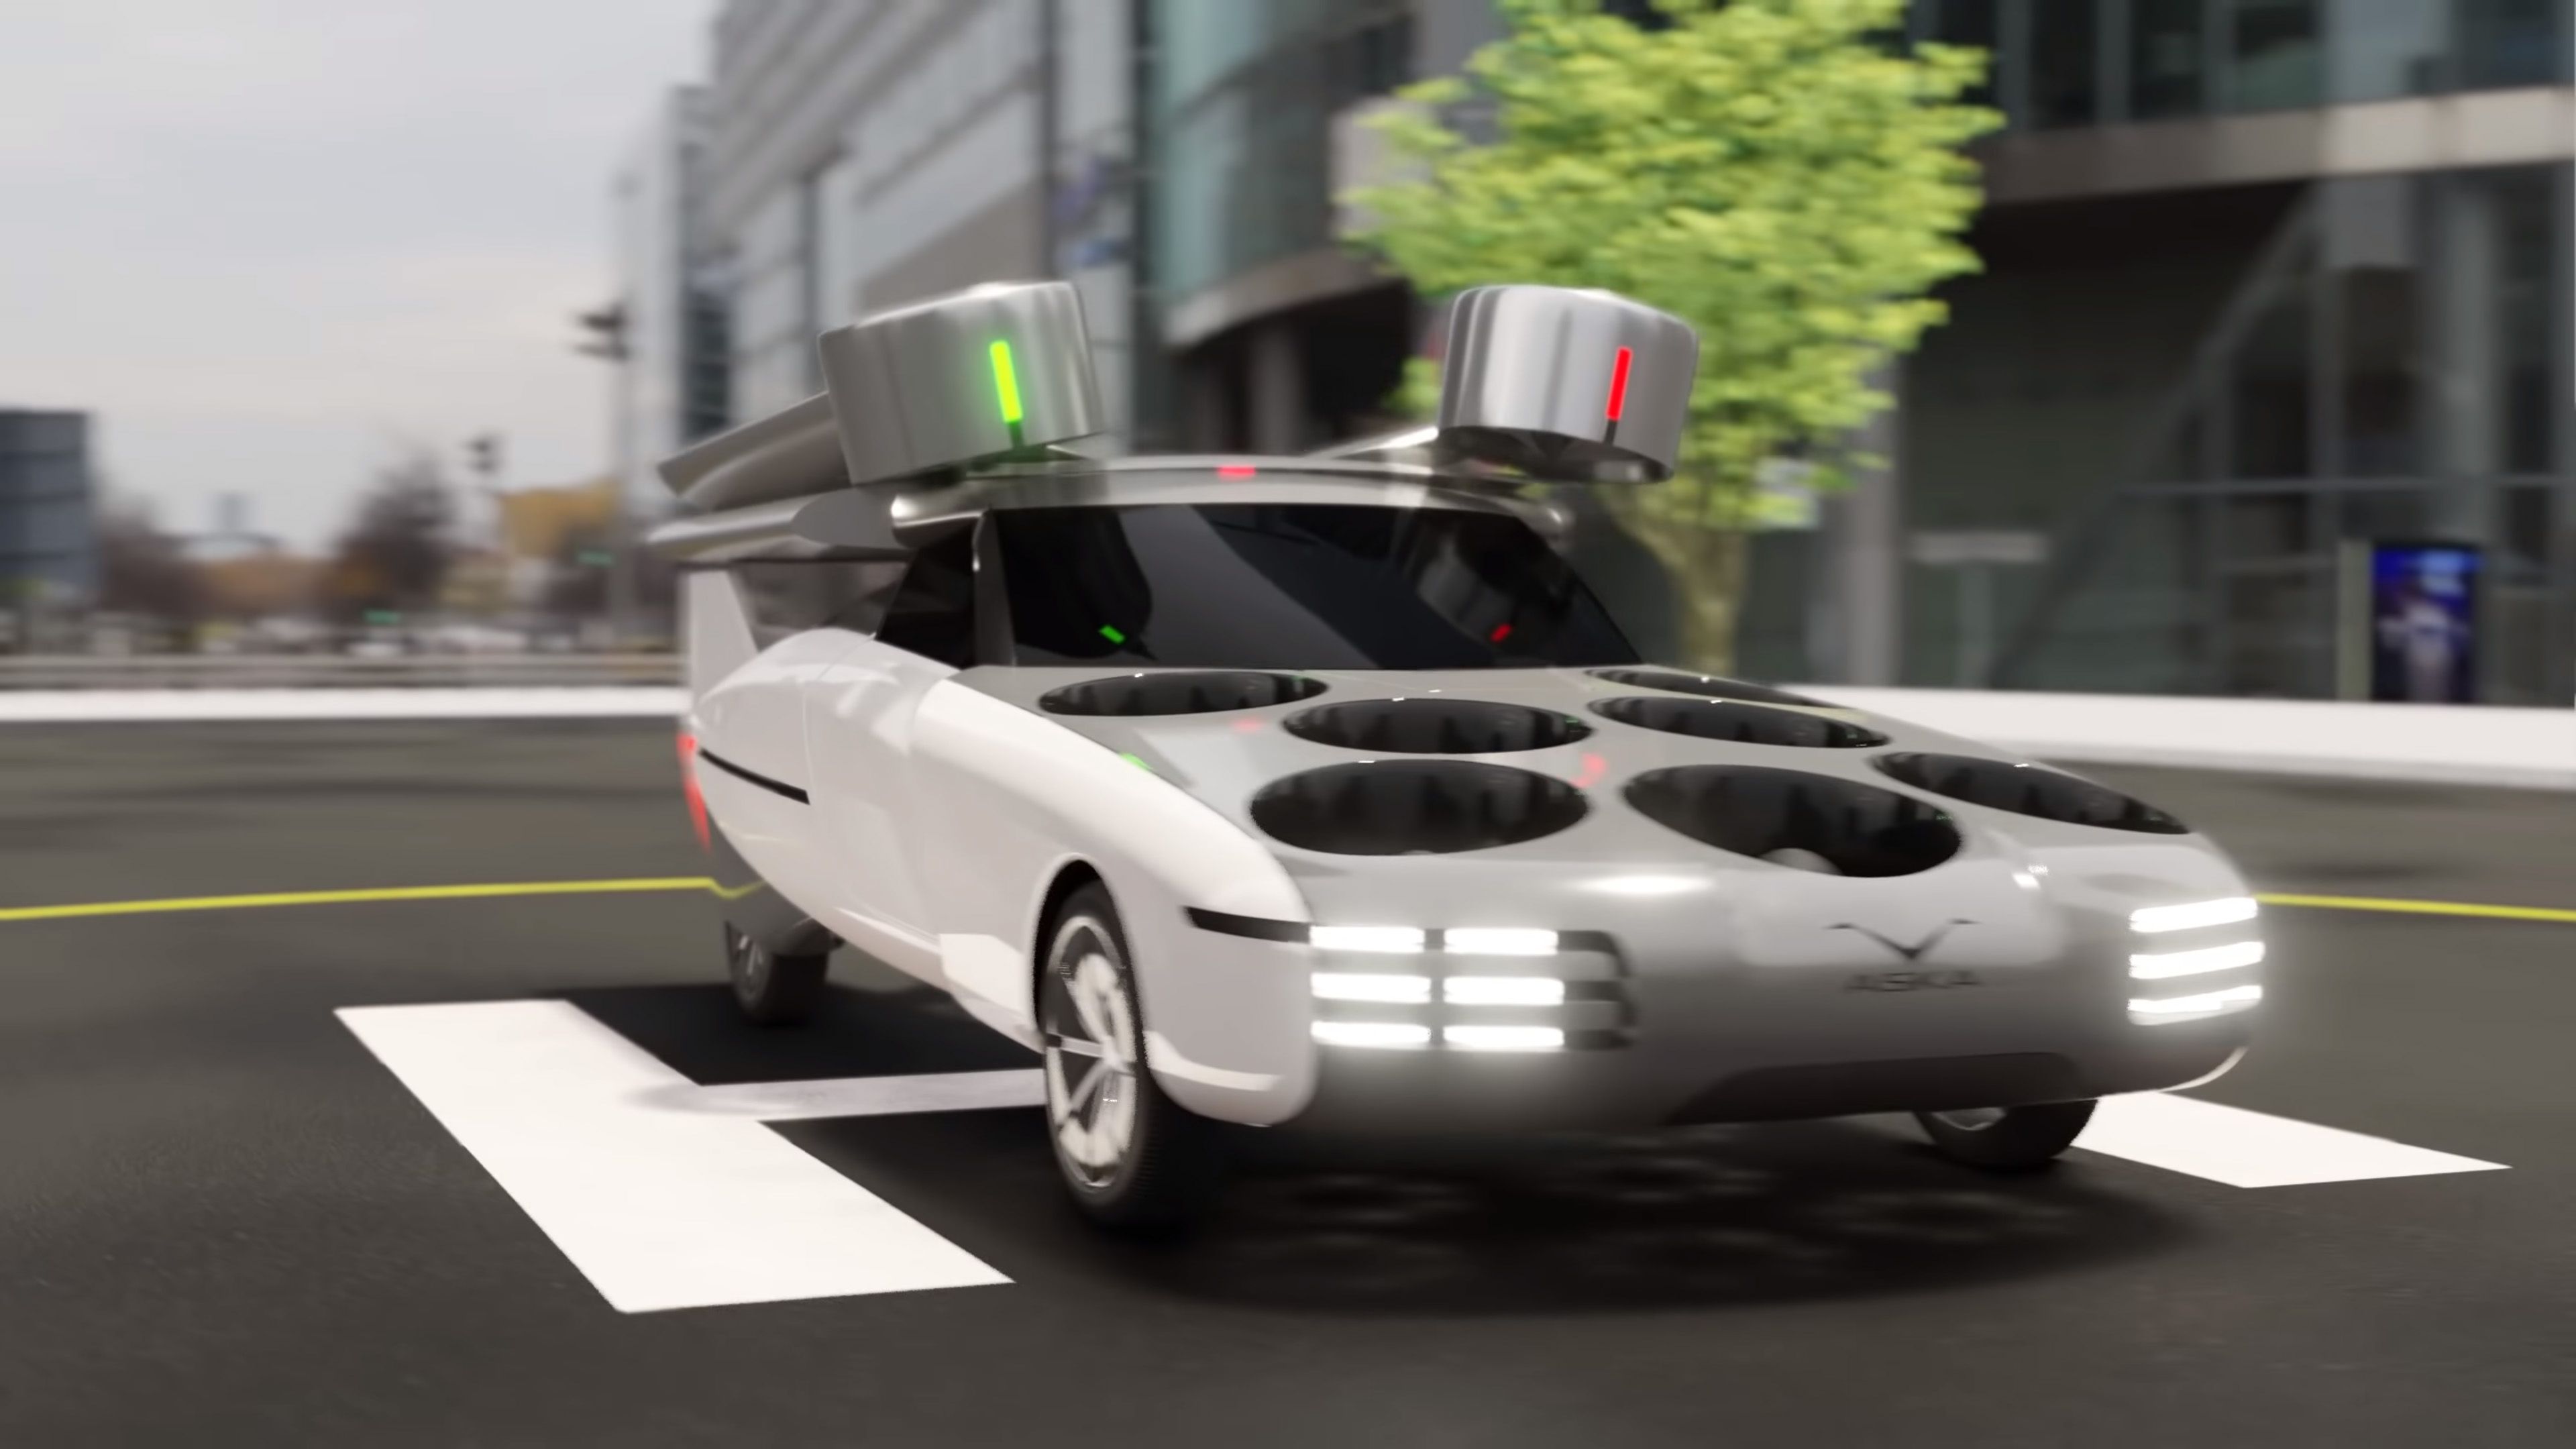 10 things you need to know about the world's first fully electric flying car